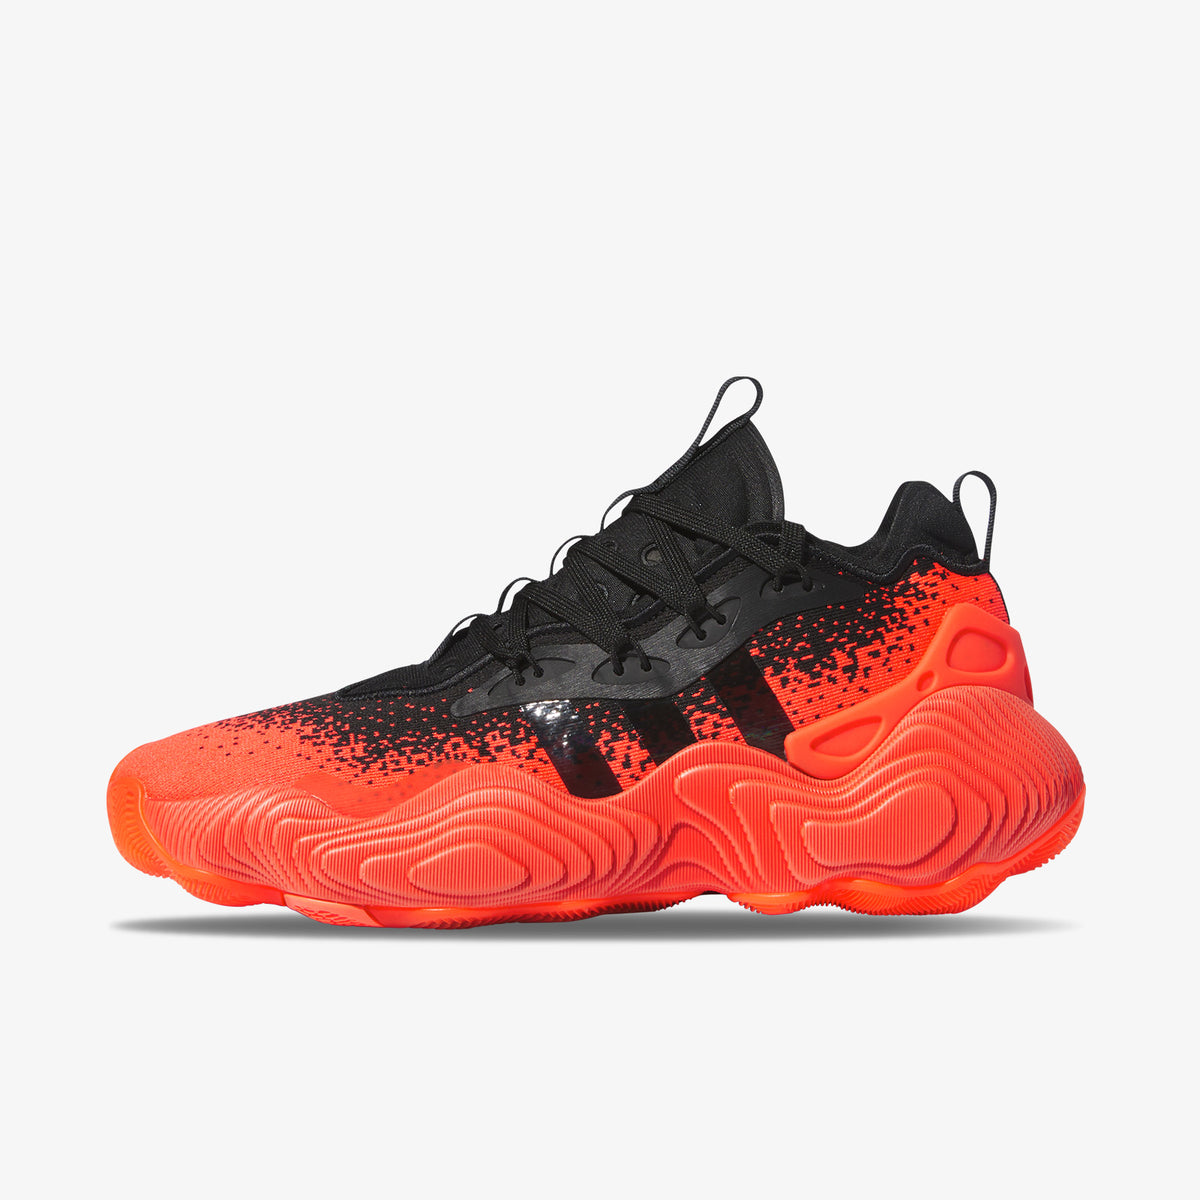 Trae Young 3 - Black/Red